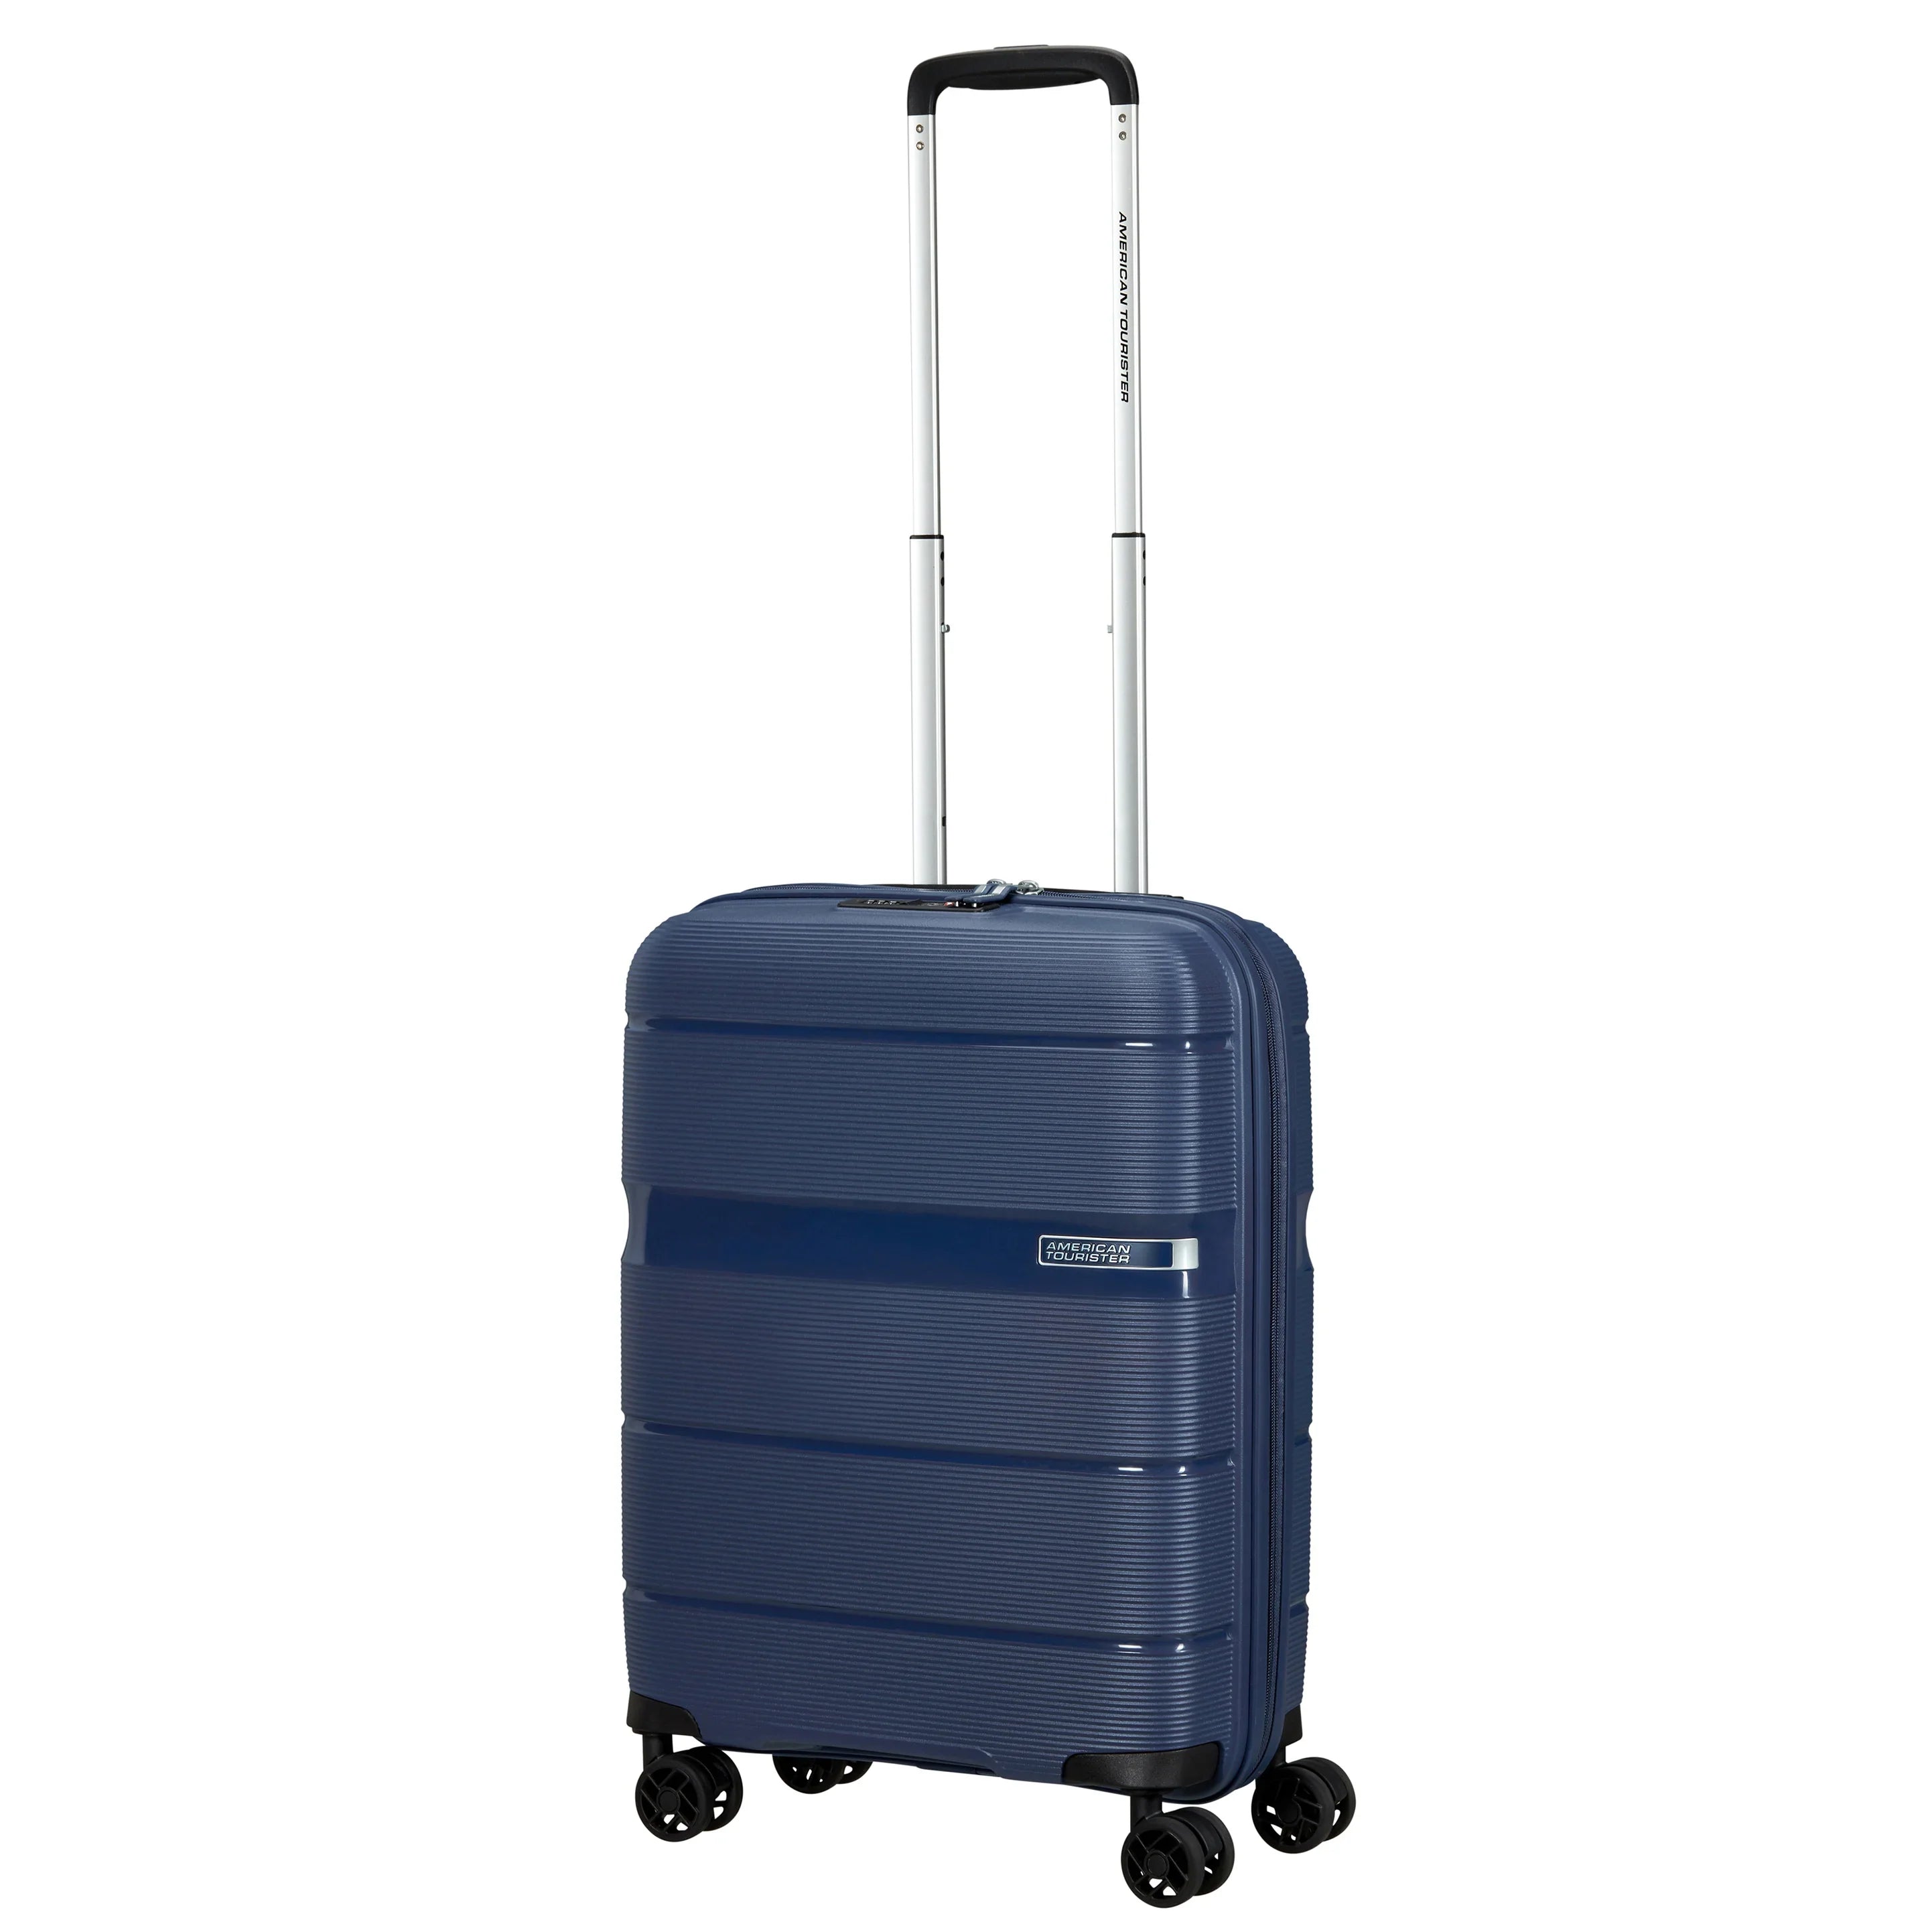 American Tourister Linex trolley cabine 4 roues 55 cm - marine profonde